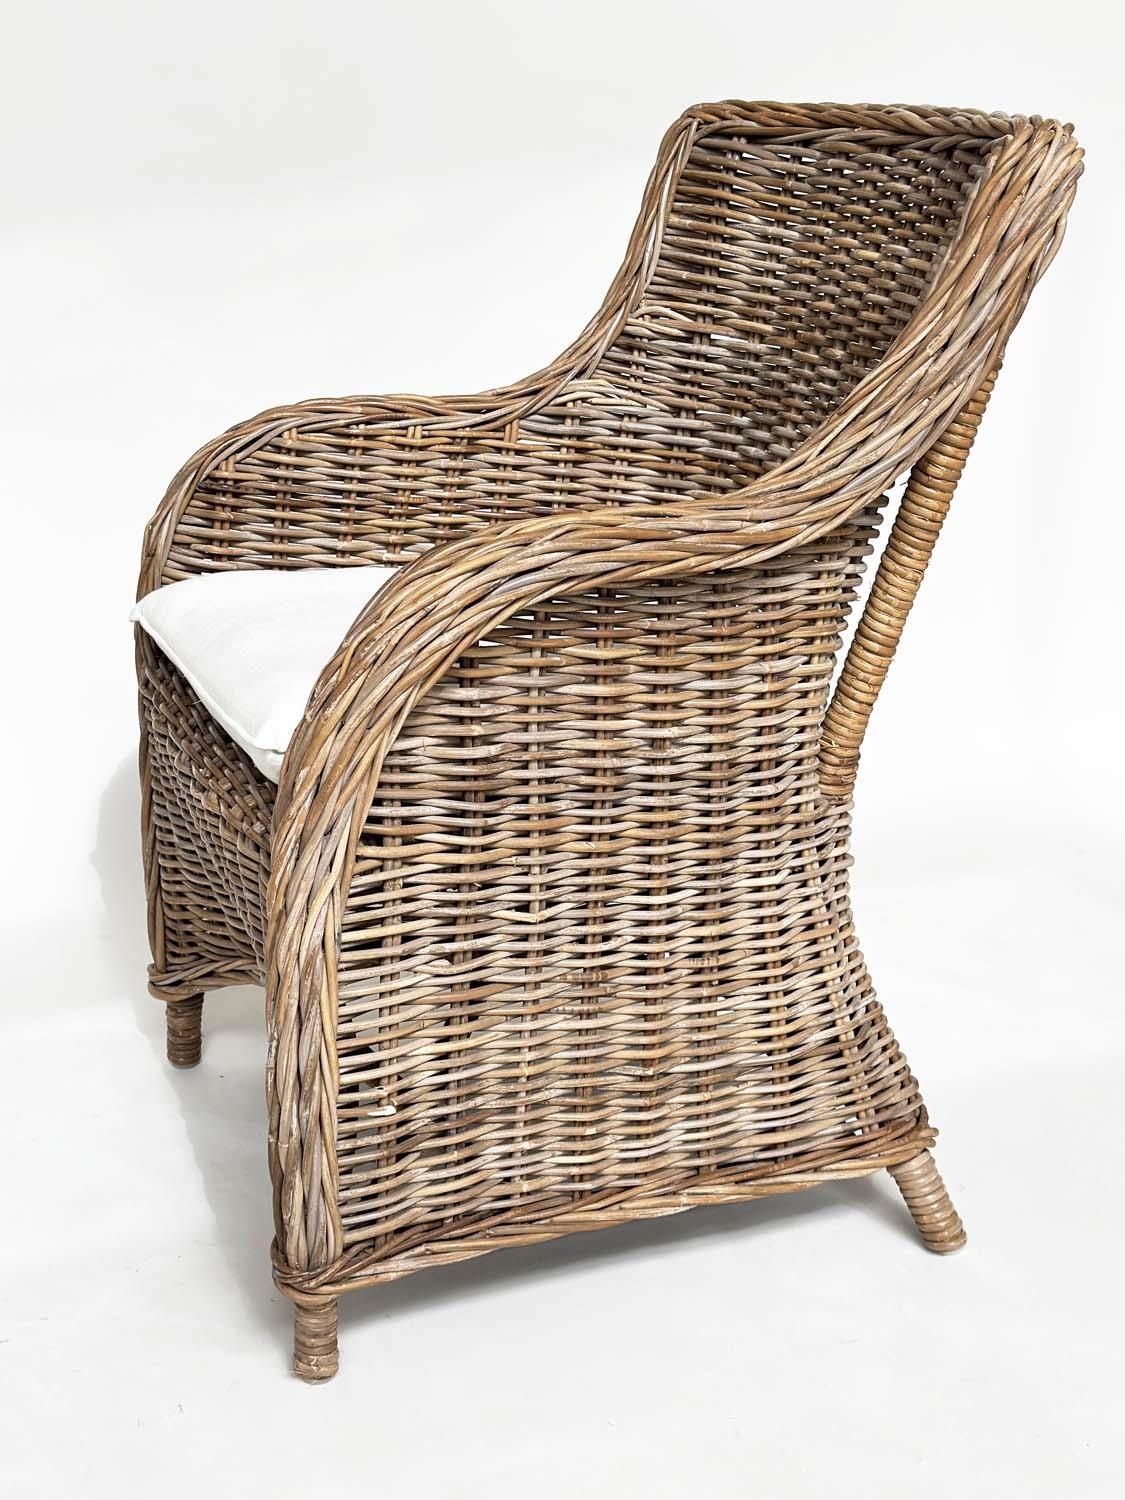 ORANGERY ARMCHAIRS, a pair, rattan framed and woven with cushion seats. (2) - Image 14 of 15